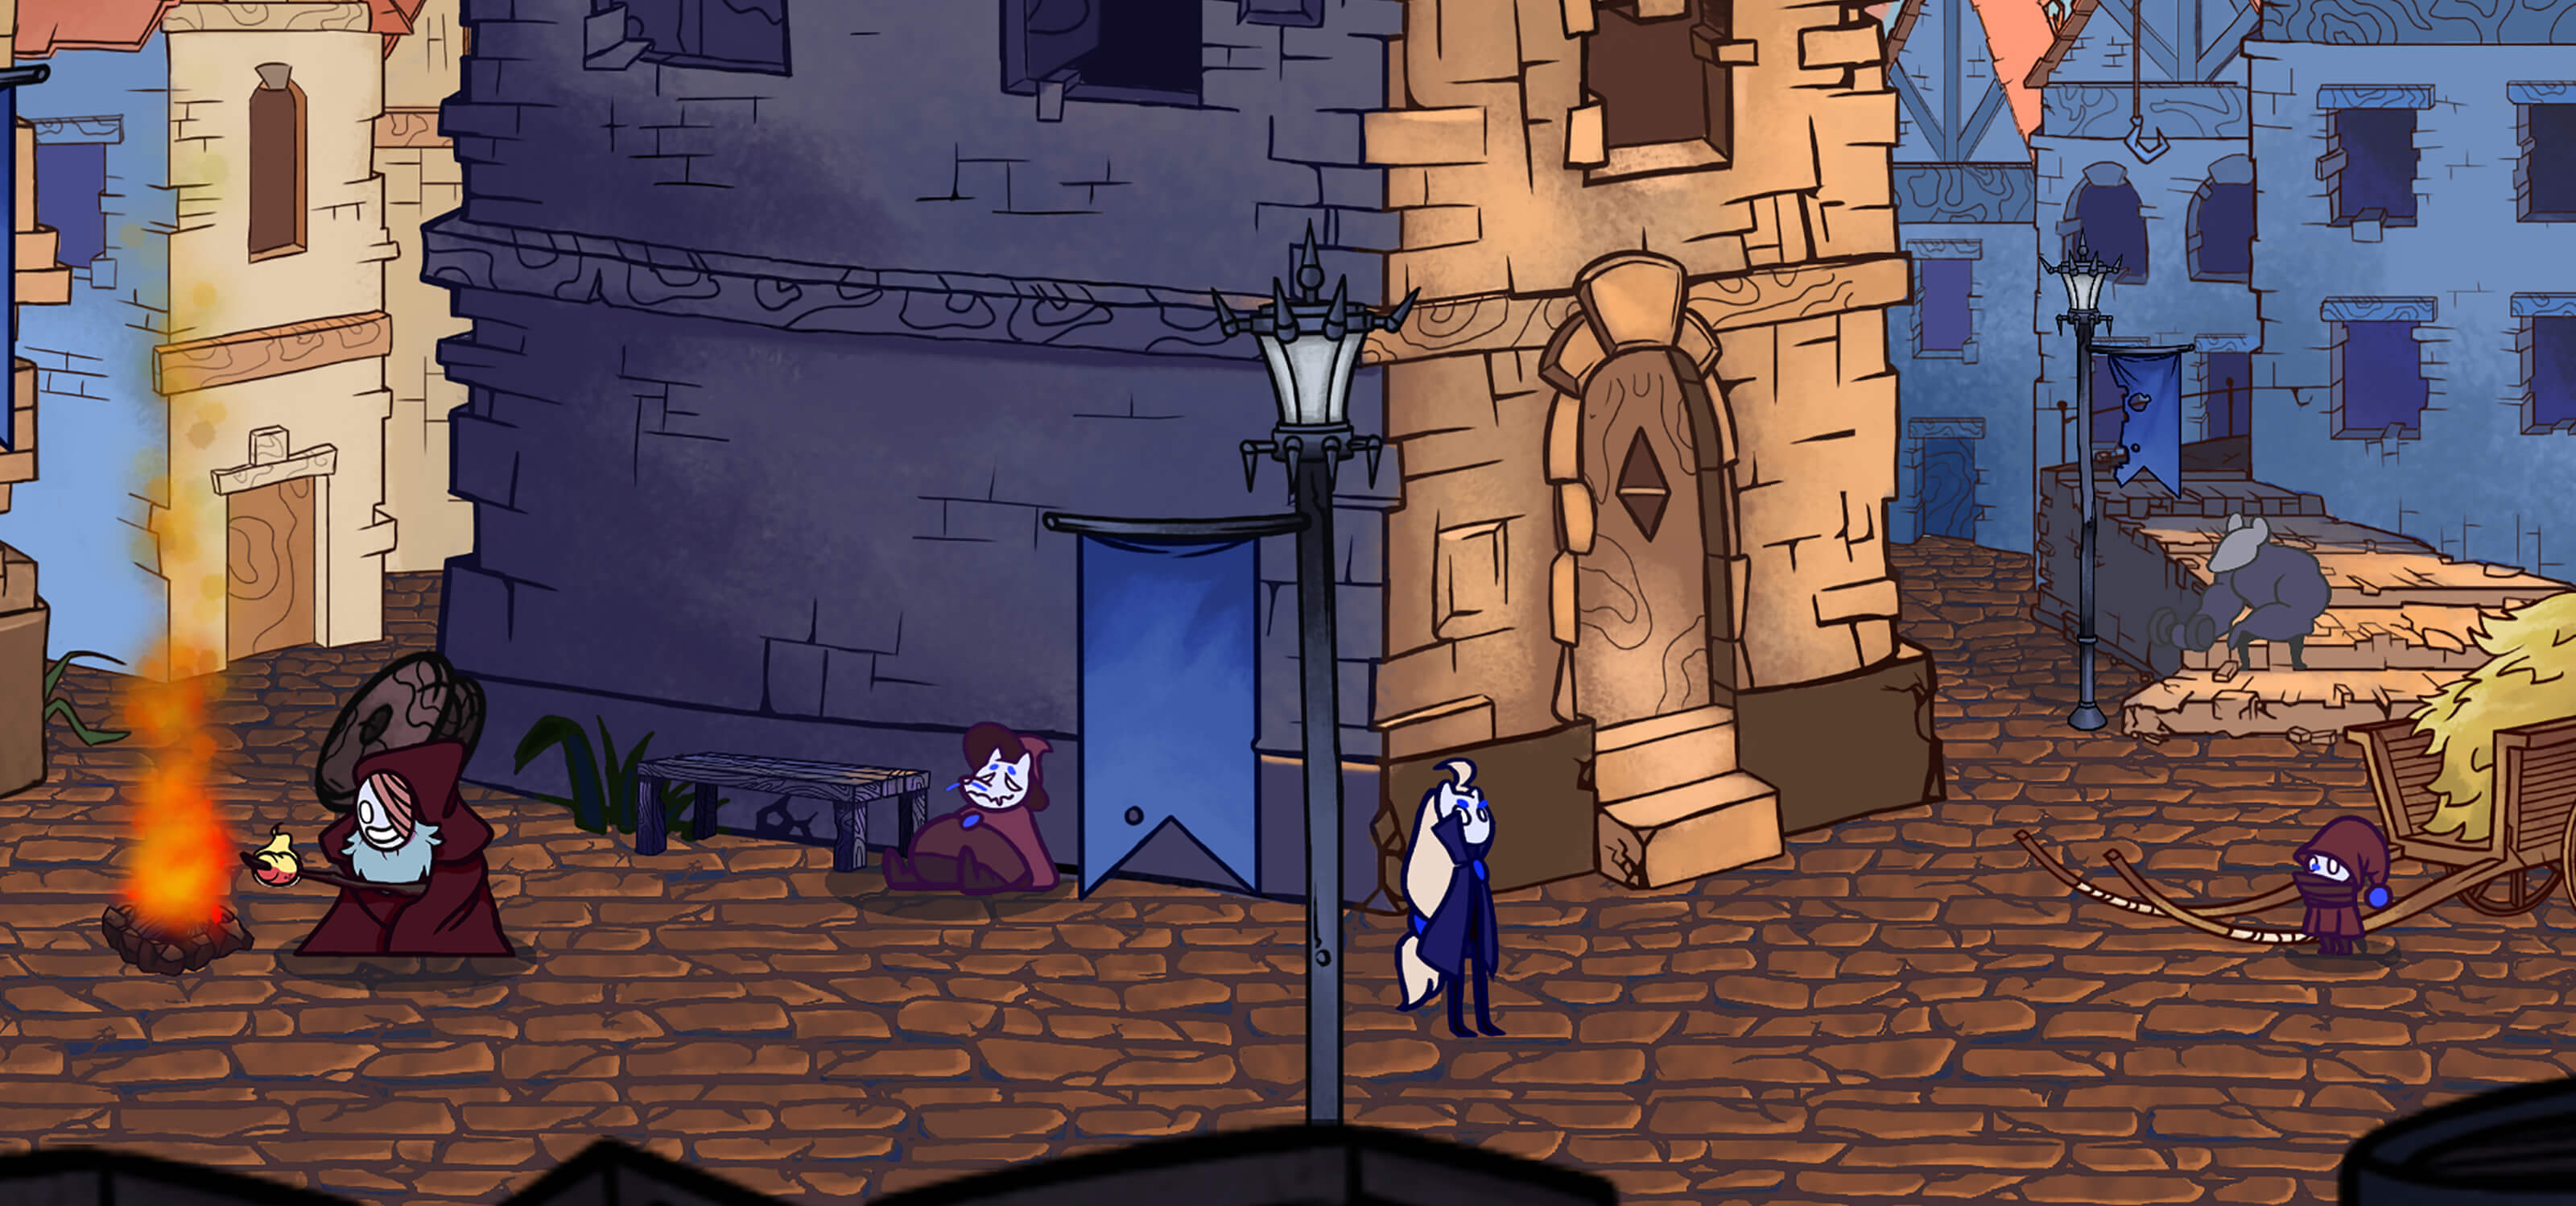 Screenshot from award-winning student game Jera, featuring a village scene with various characters